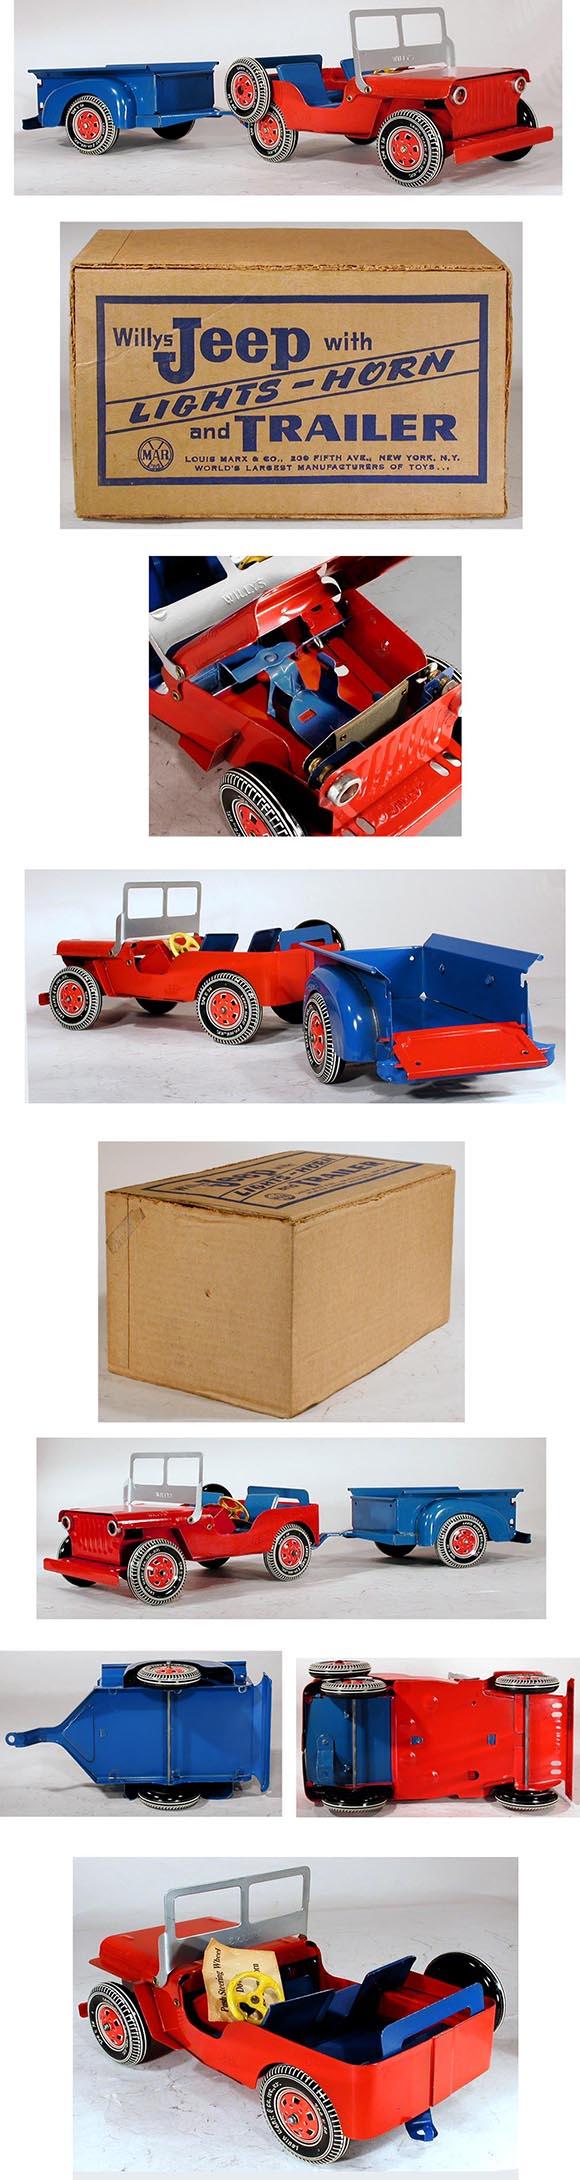 1952 Marx, Willys Electric Jeep with Trailer in Original Box